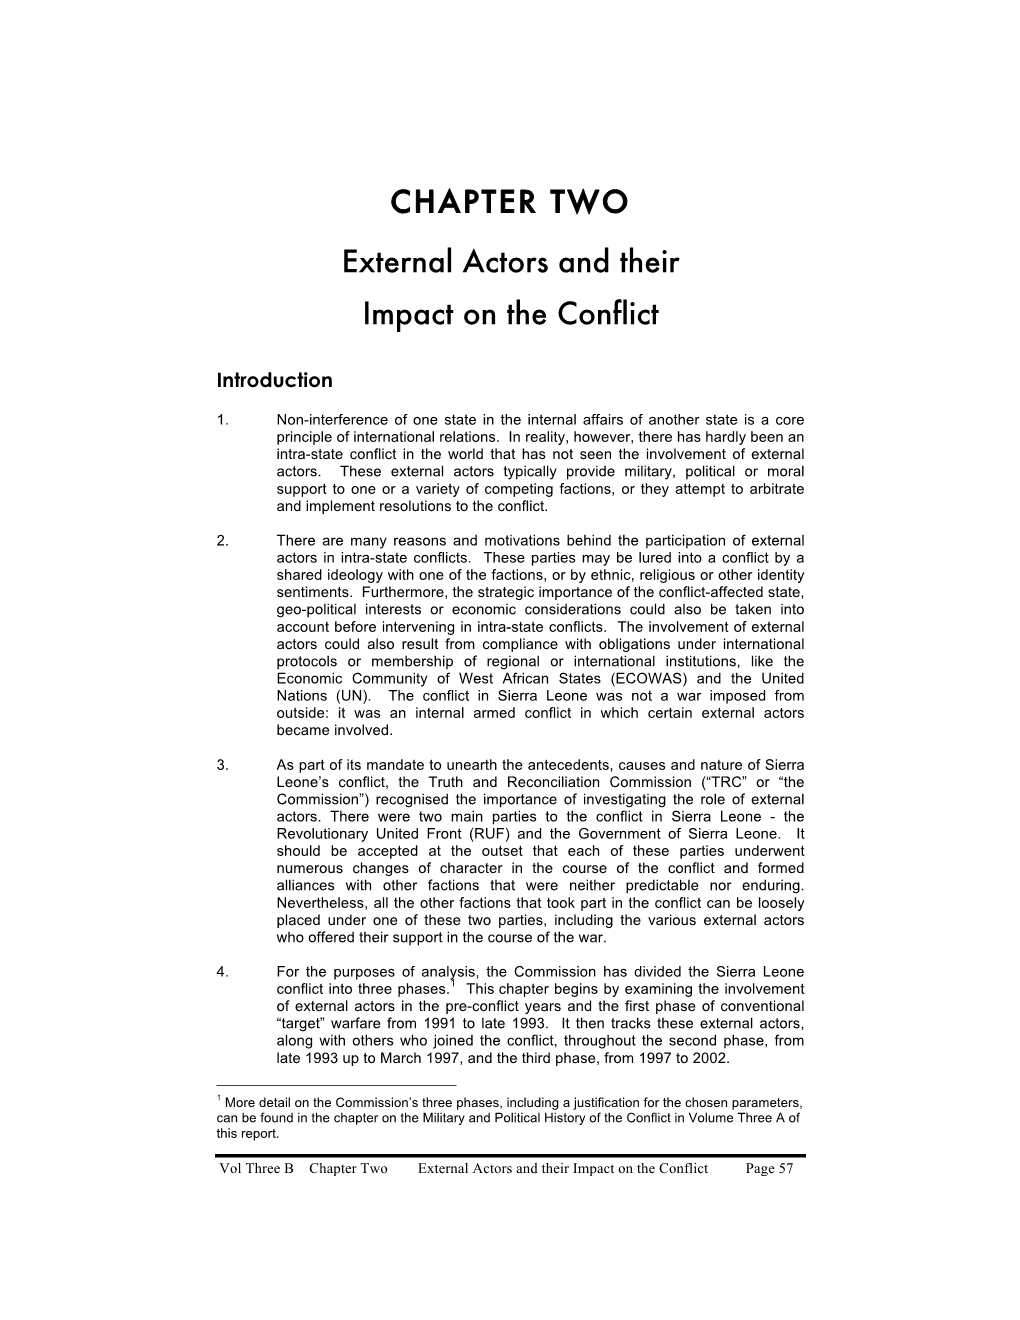 CHAPTER TWO External Actors and Their Impact on the Conflict